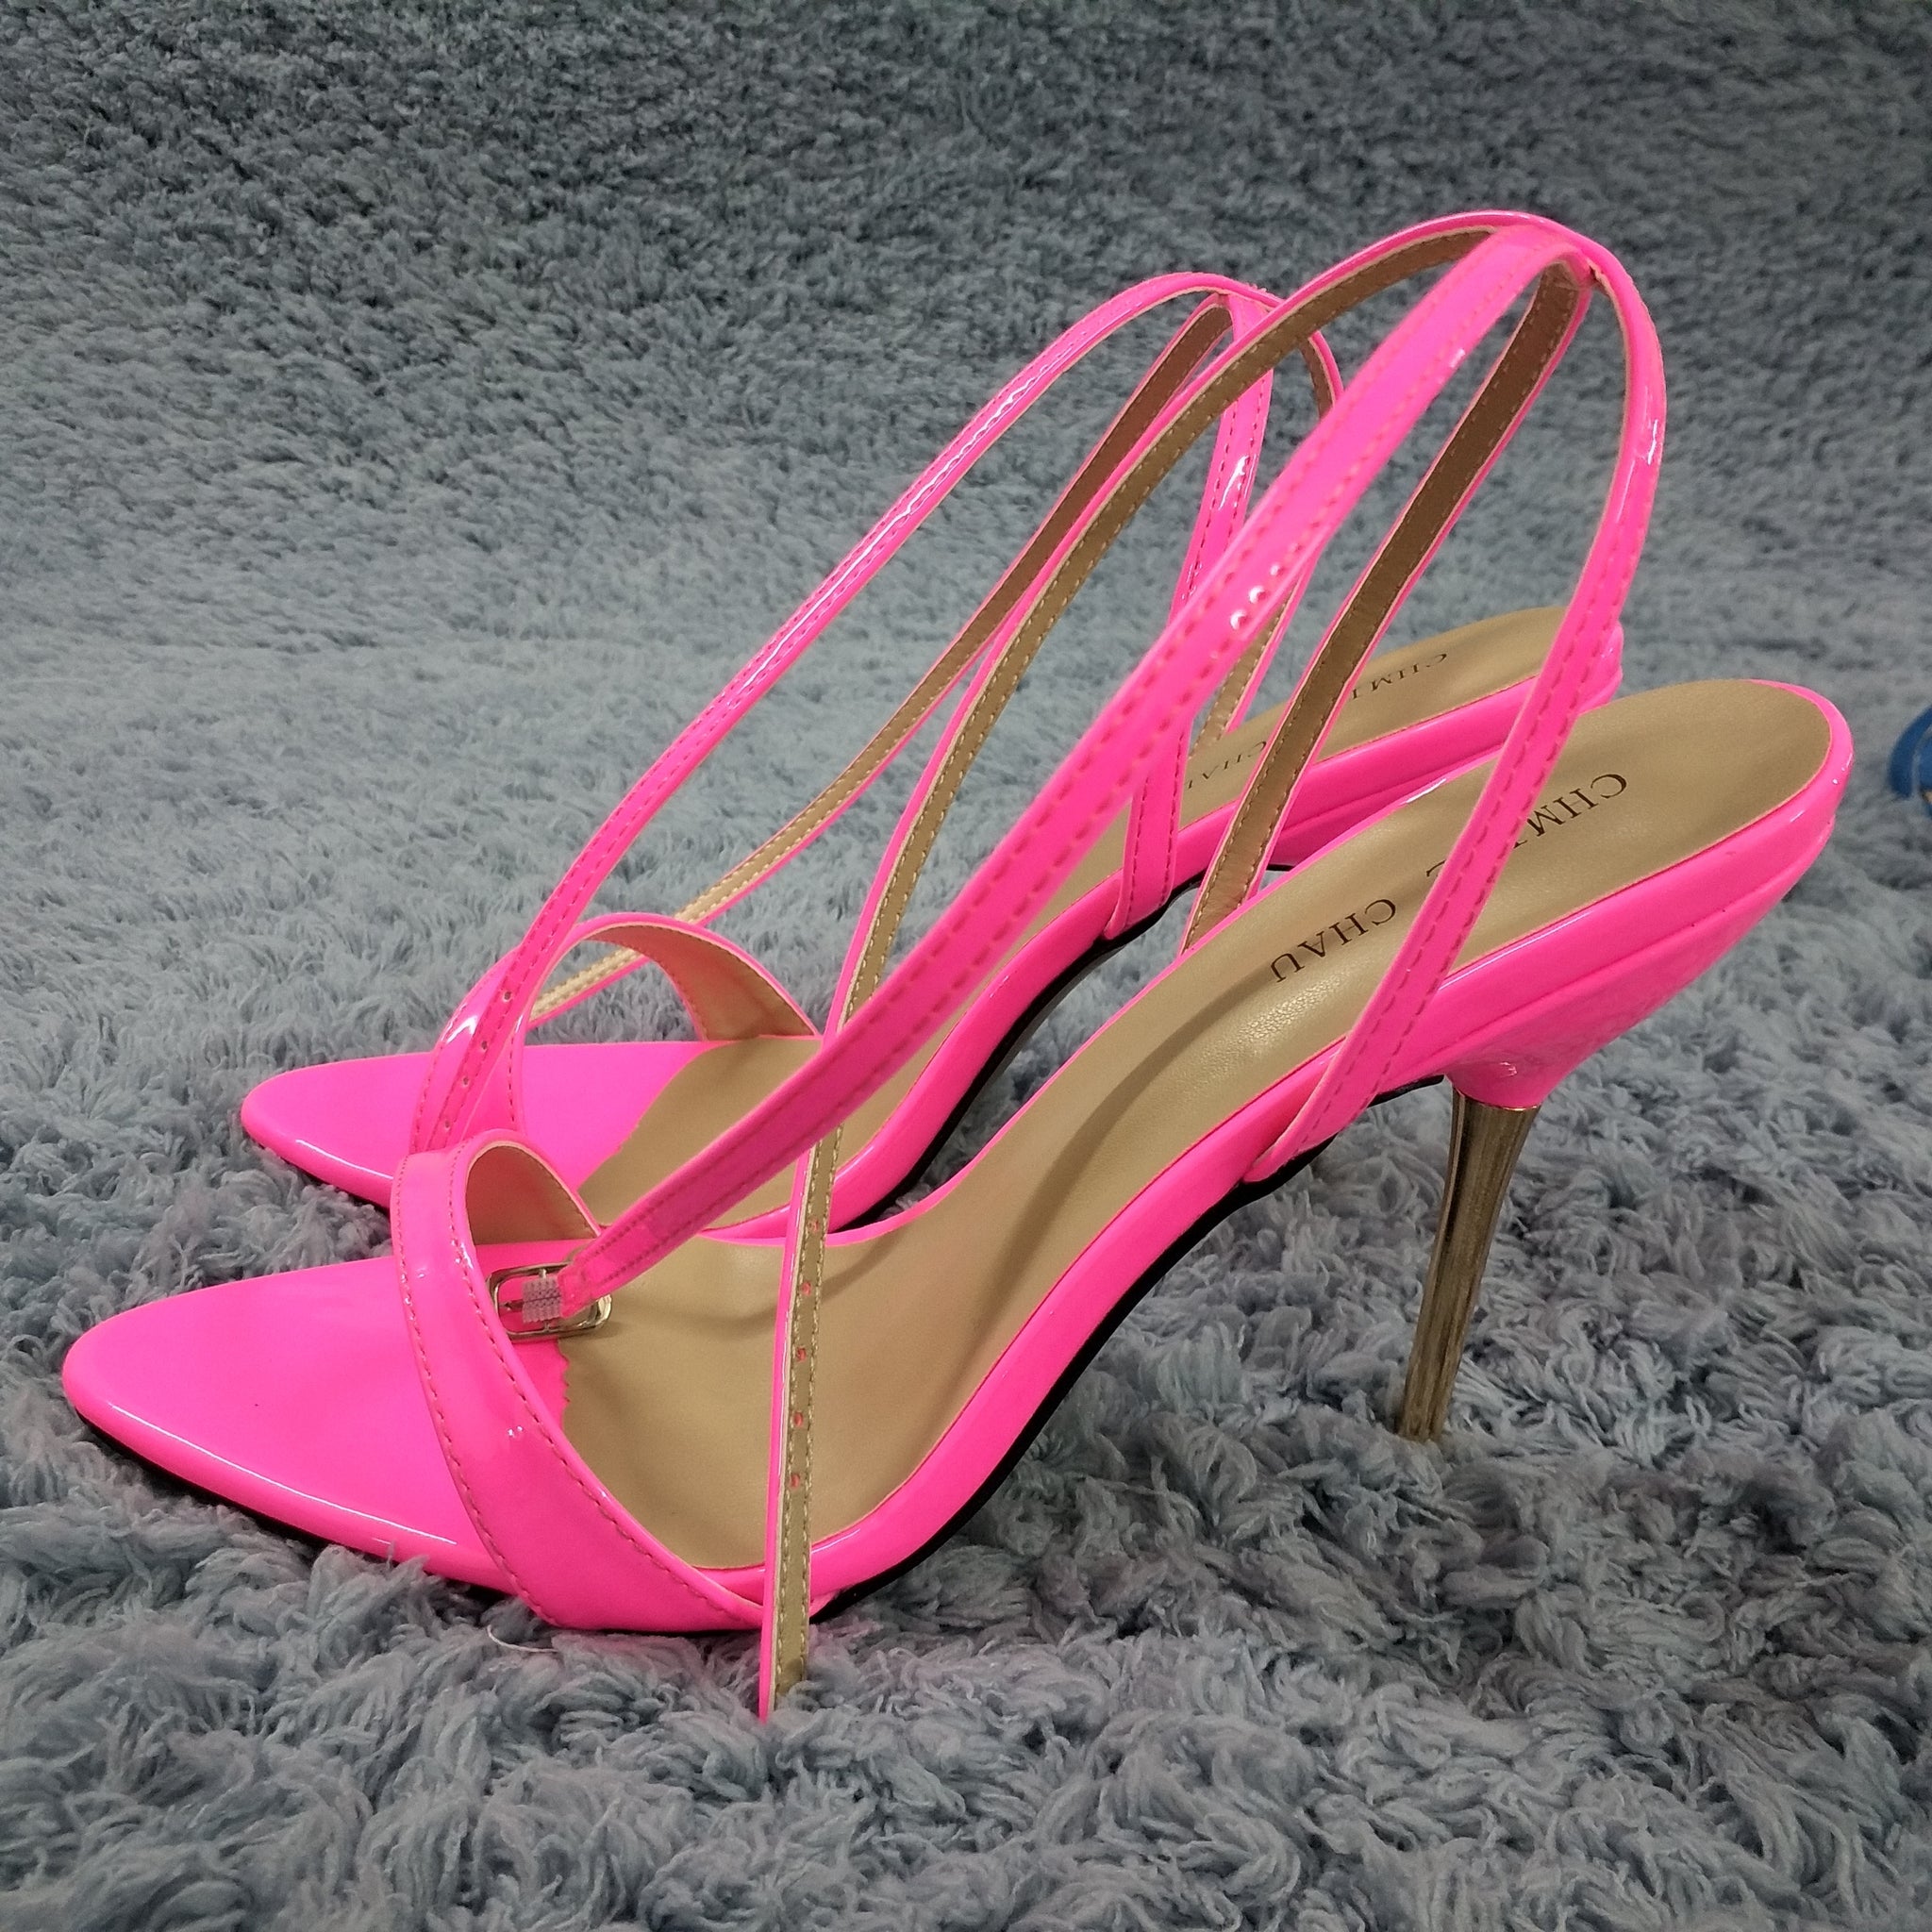 hot pink shoes